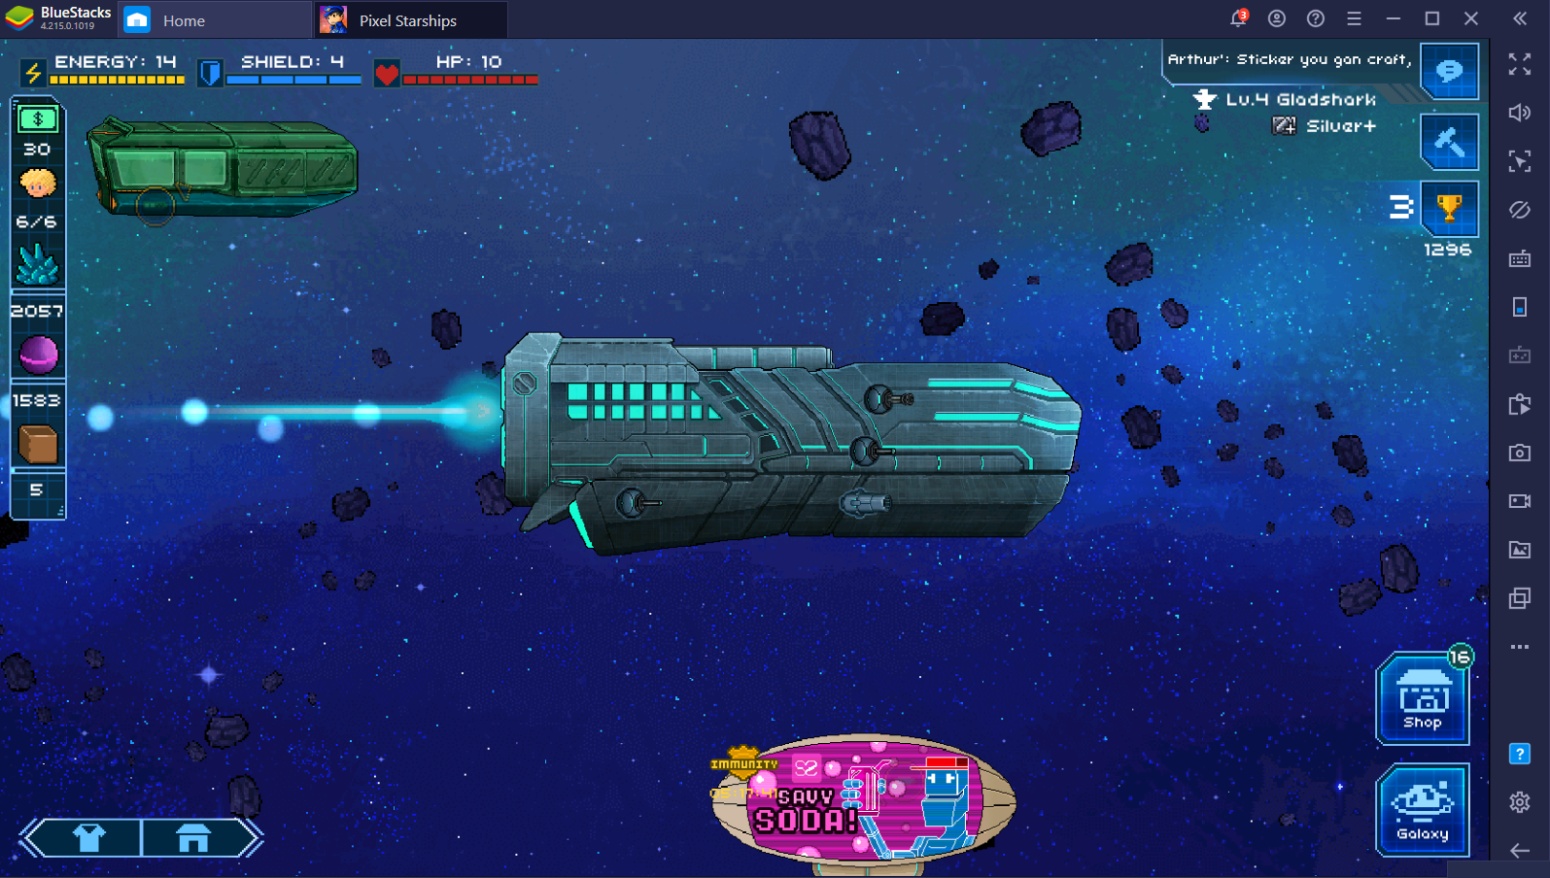 Setting Up Pixel Starships For Victory with BlueStacks on PC